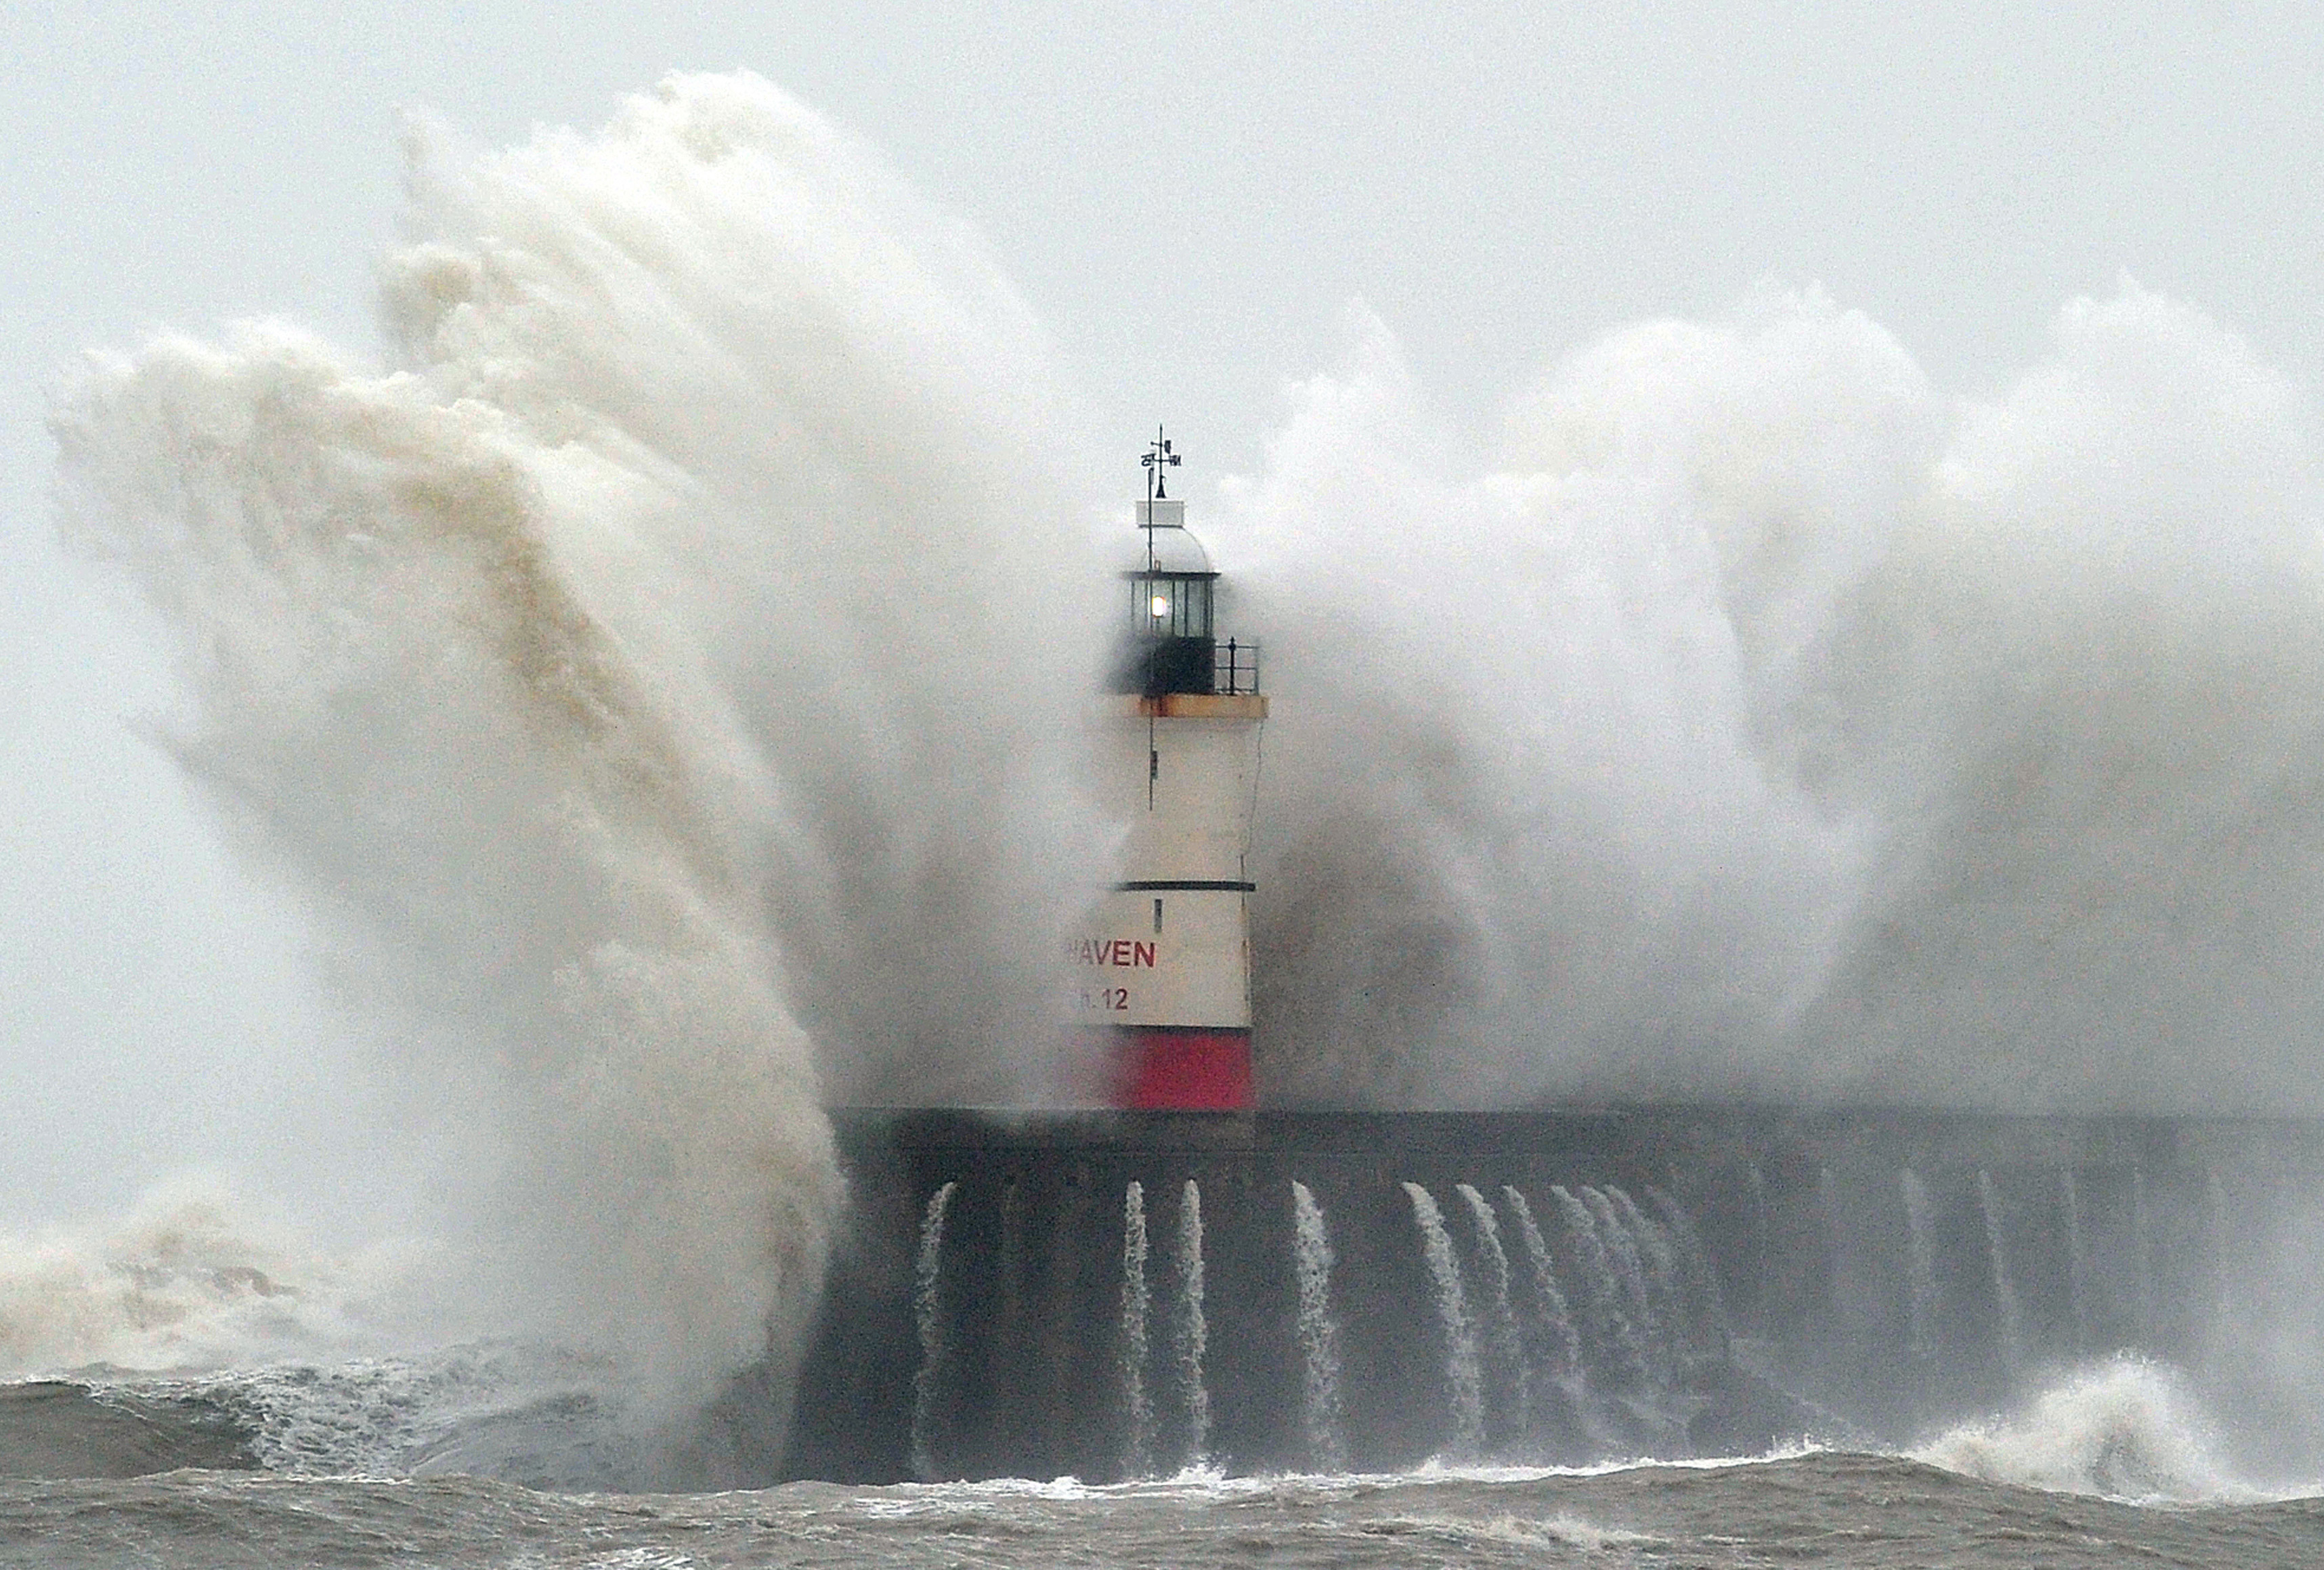 Newhaven Lighthouse is battered by waves during stormy weather in Newhaven on the southern coast of England on February 5, 2014. More than 8,000 homes were without power in southwest England 